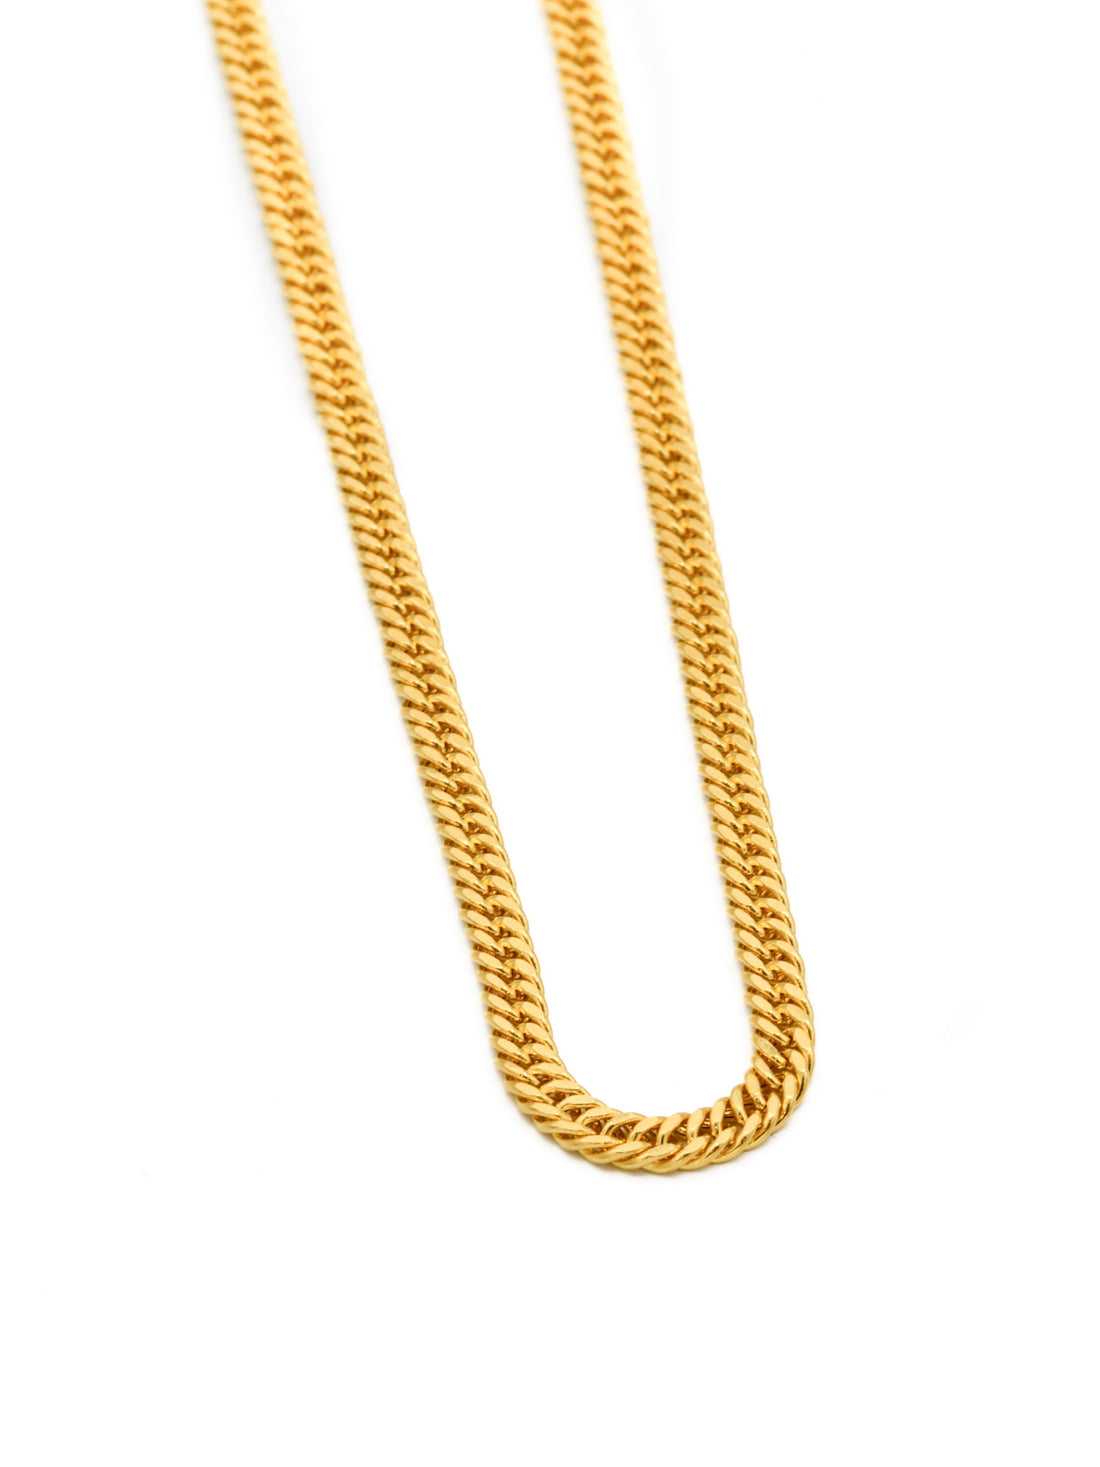 22ct Gold Hollow Curb Chain